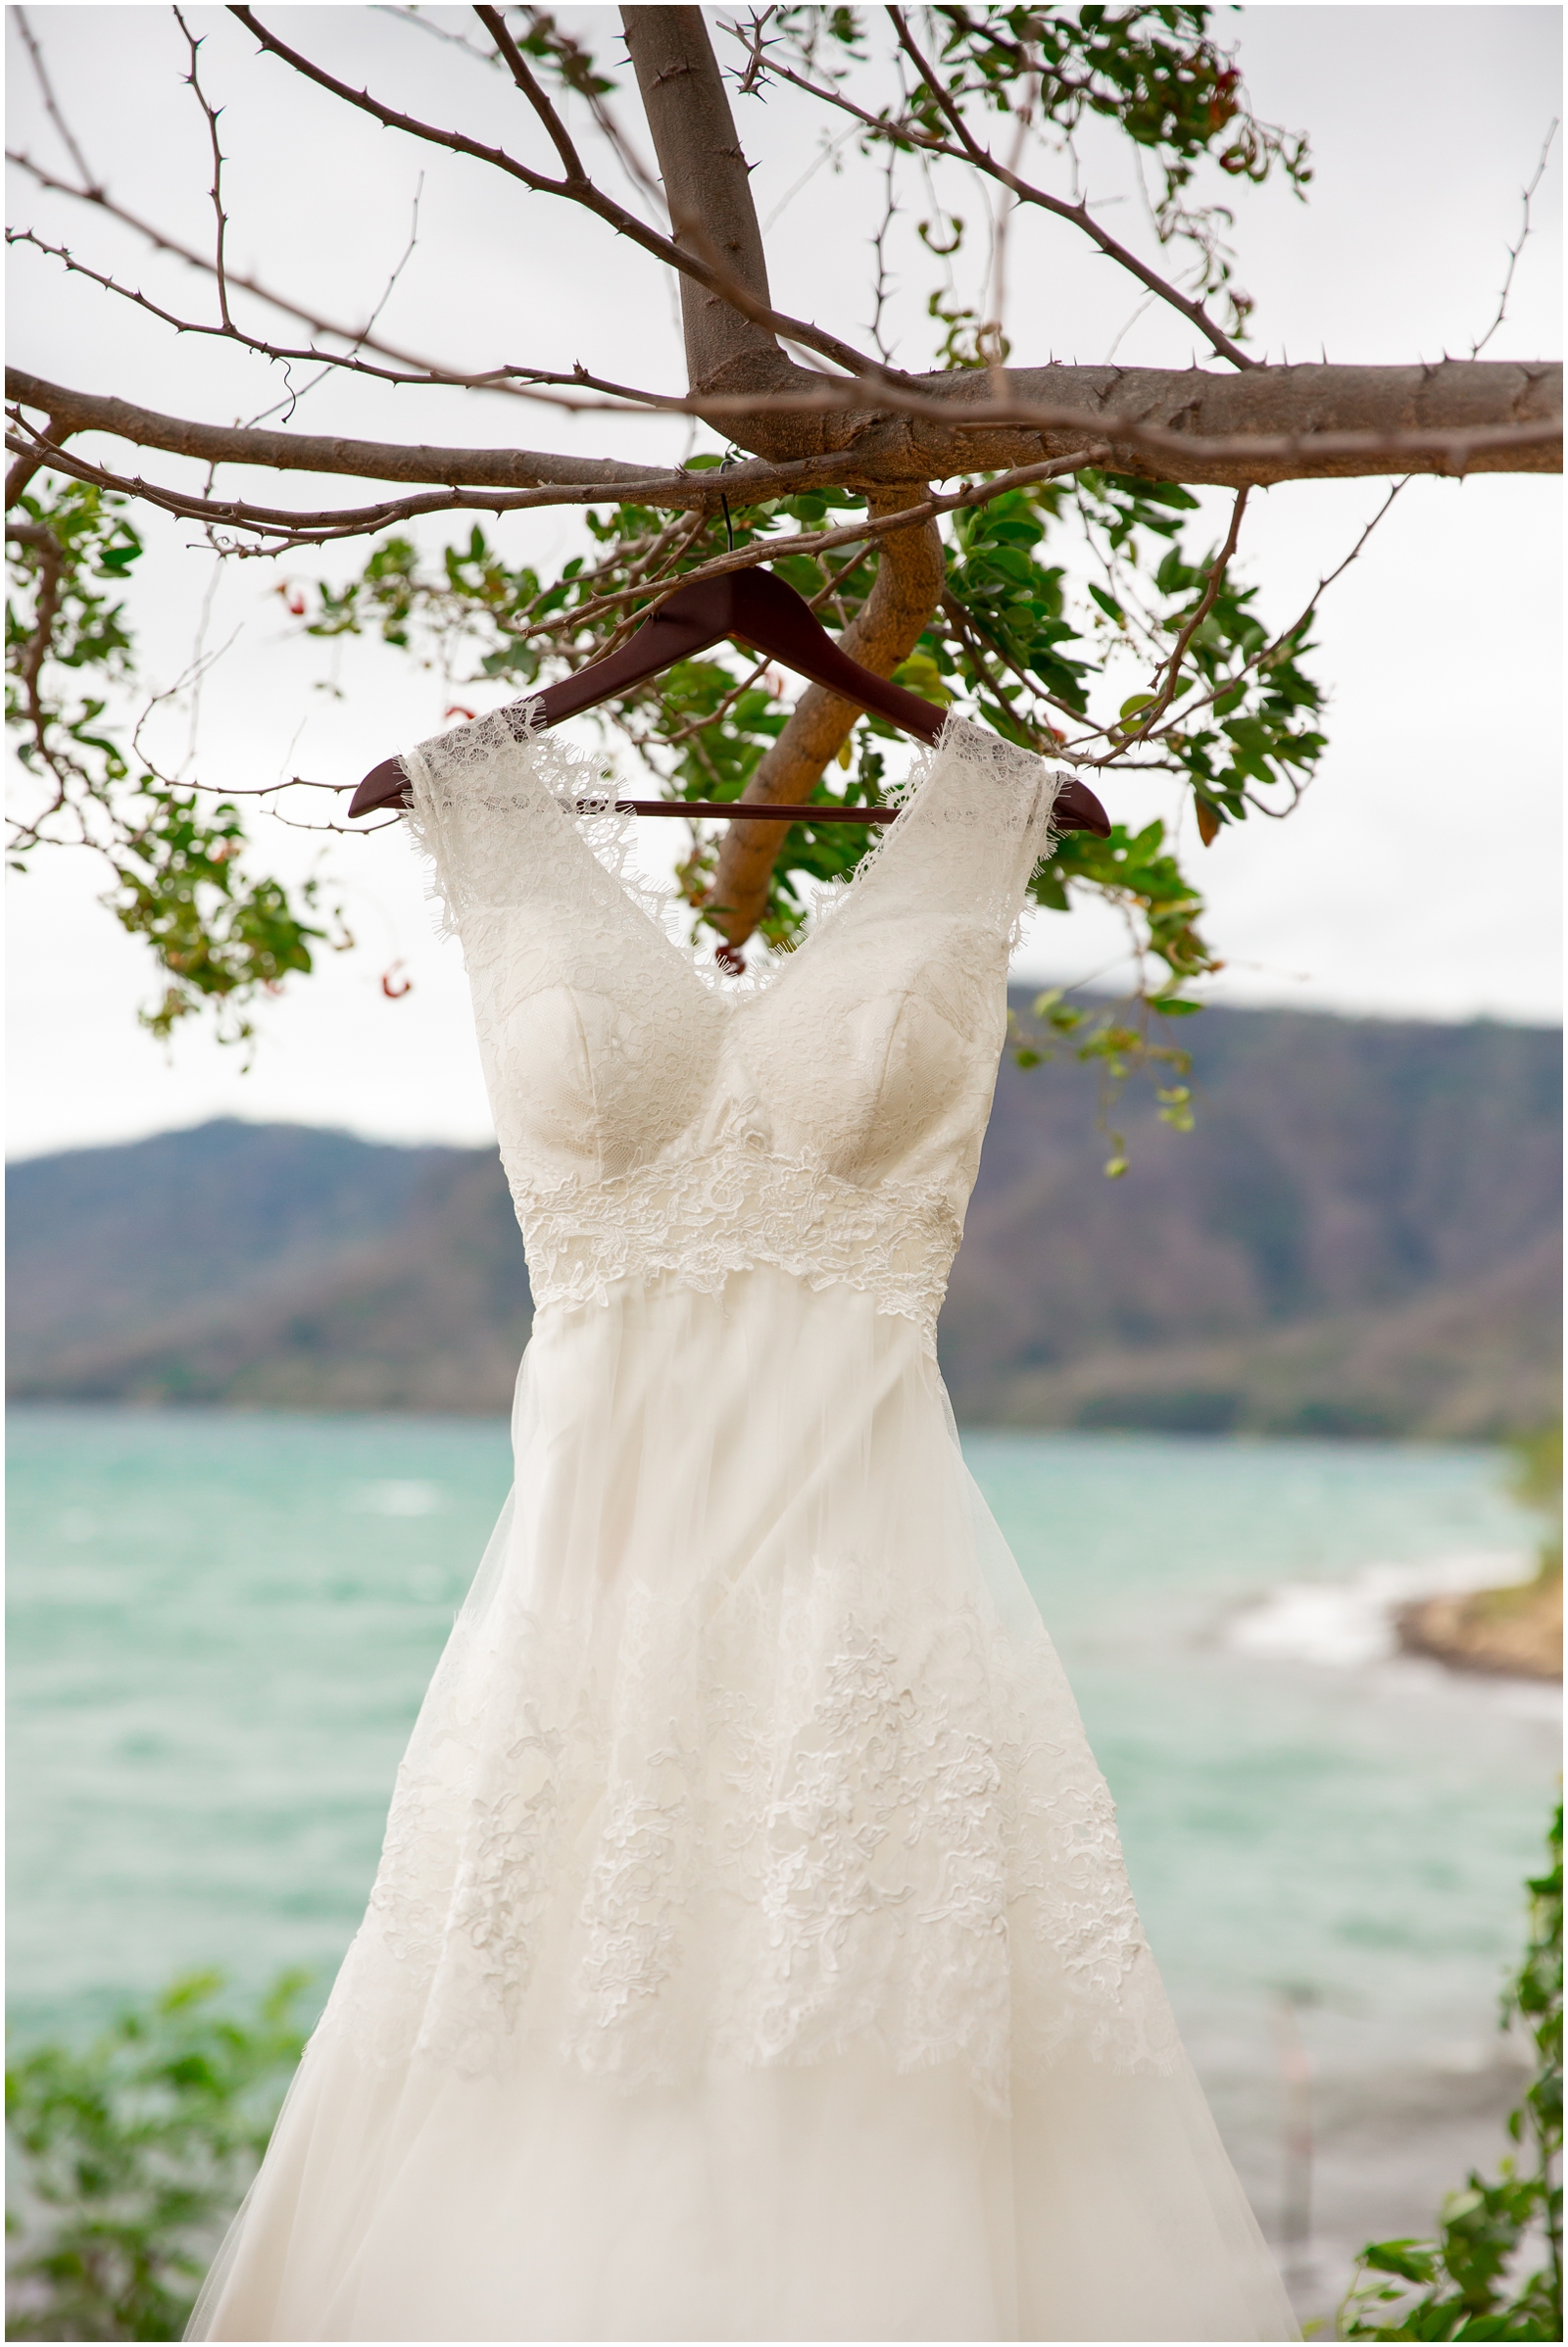 A wedding dress hung outside with a tropical lake in the background.